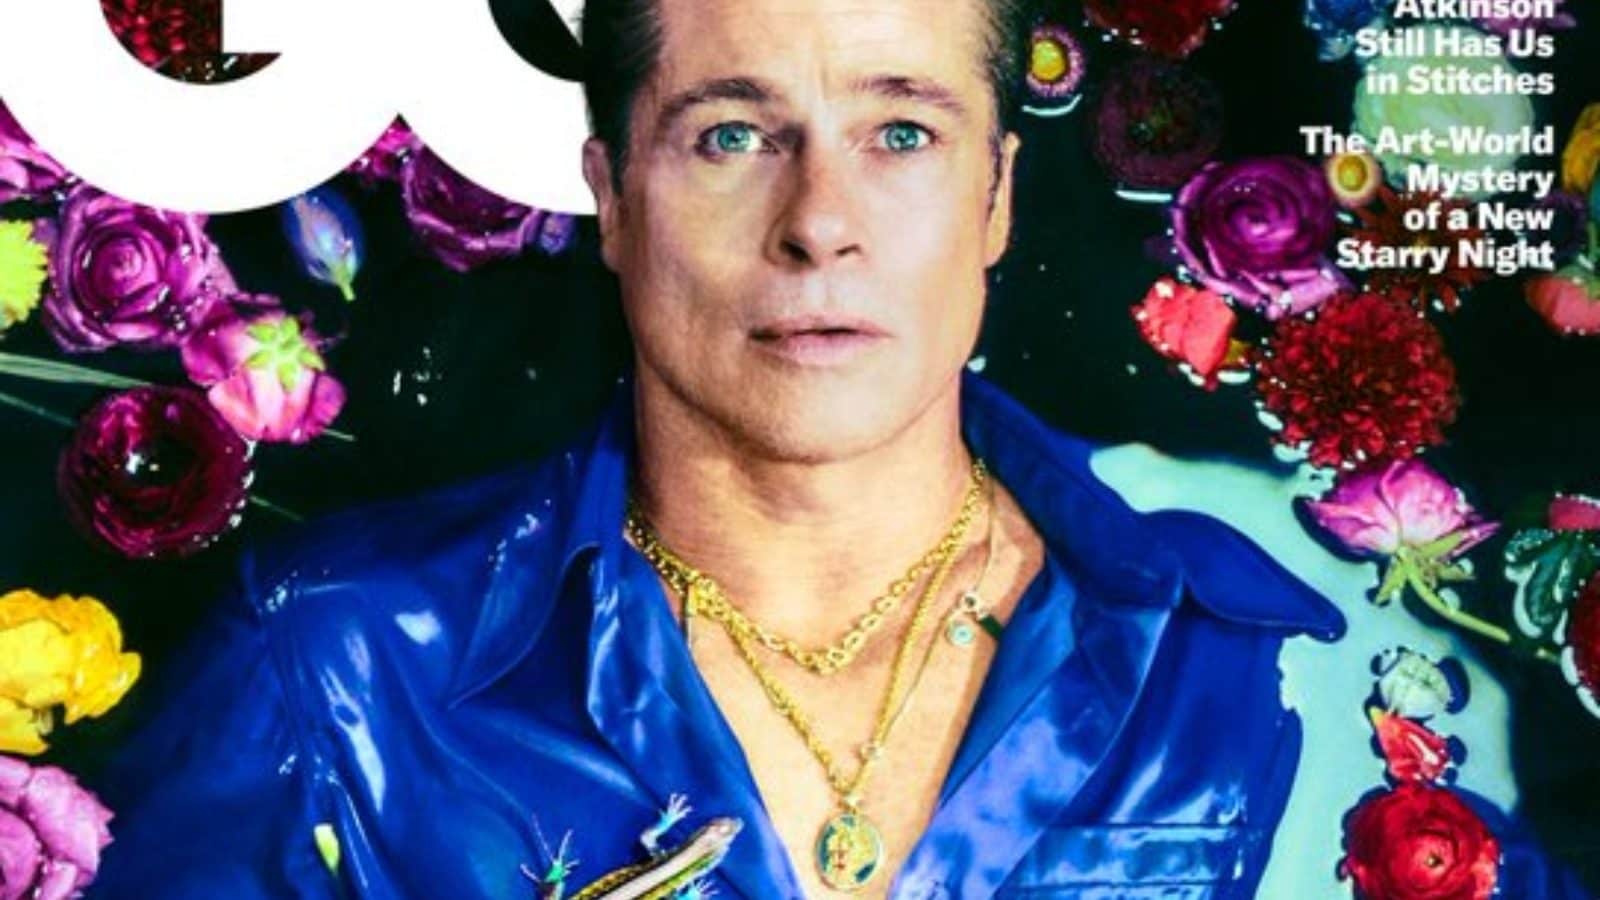 Brad Pitt’s Latest Magazine Cover Leaves Netizens Disappointed, See Reactions